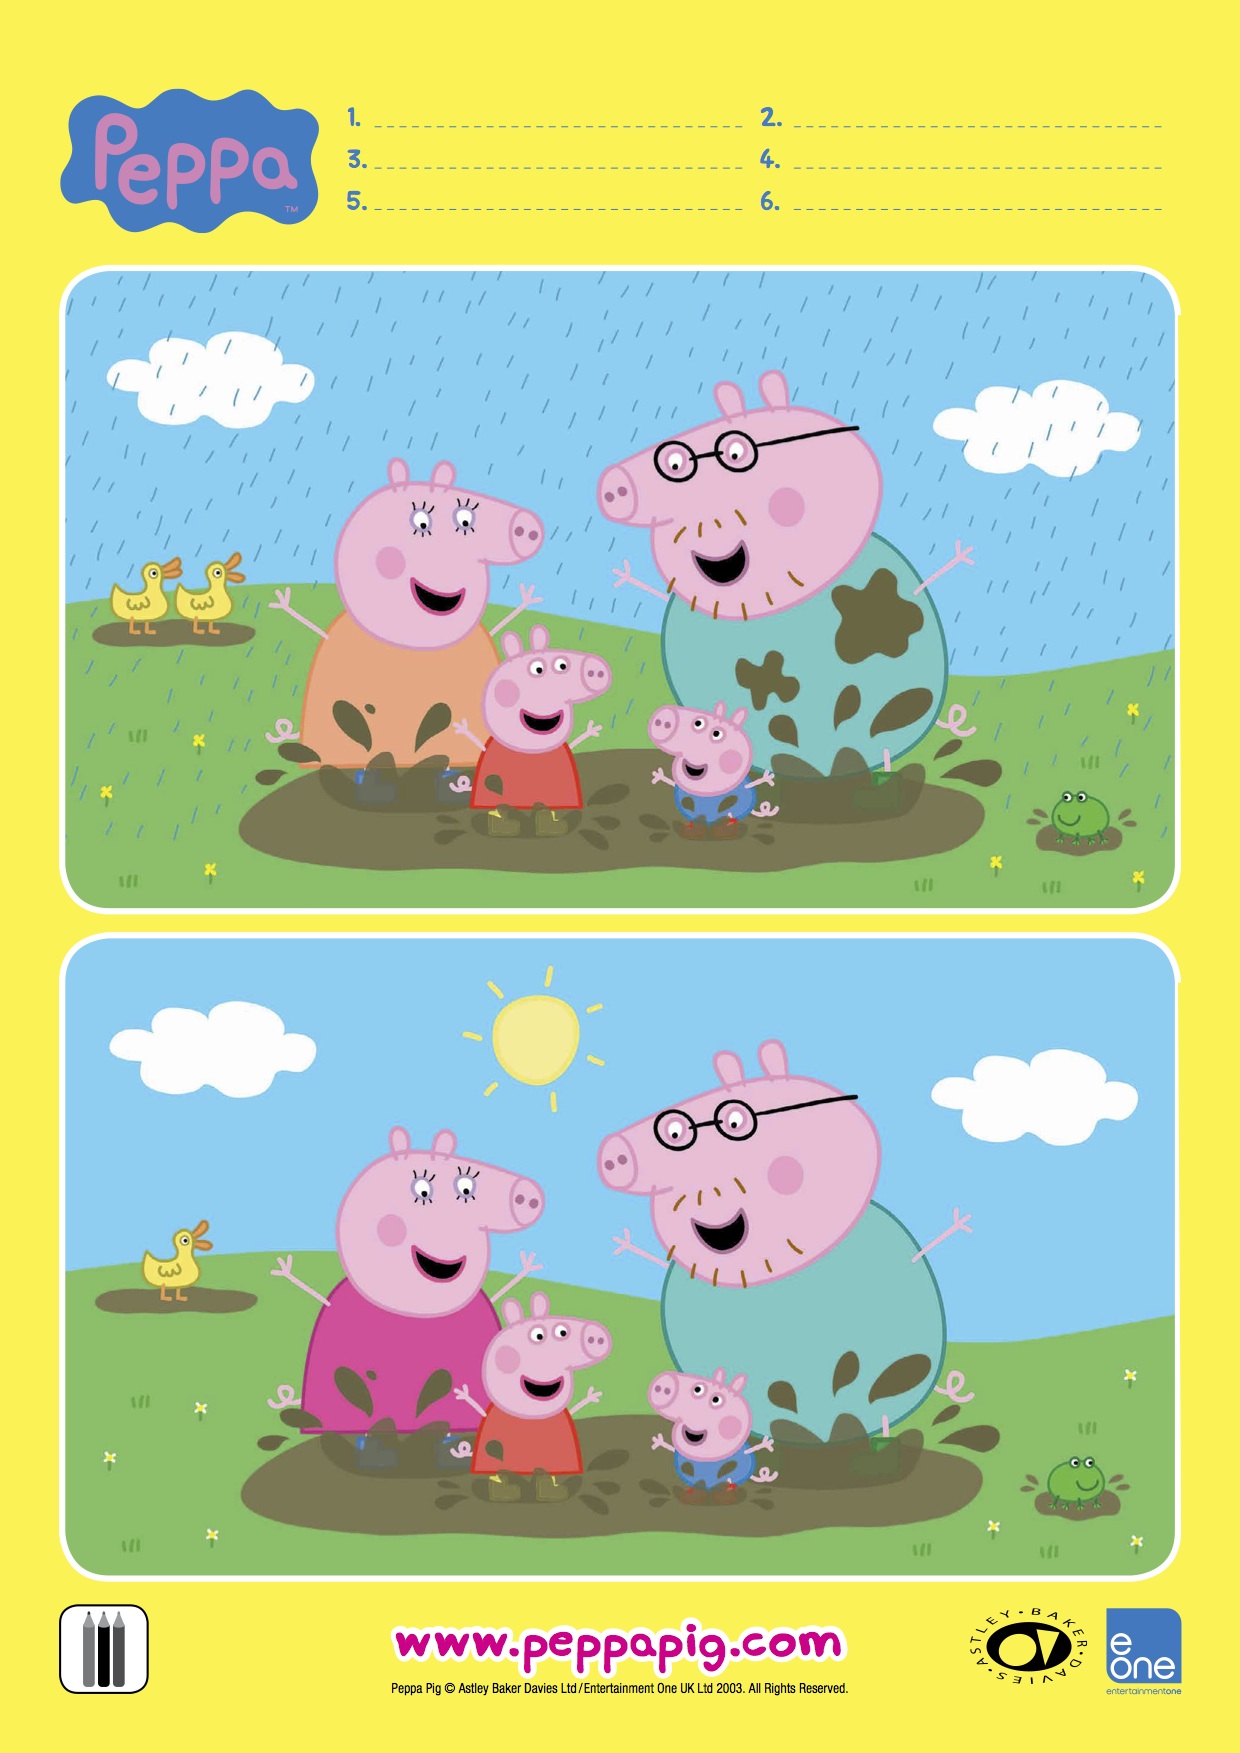 rainy-day-activities-download-these-free-peppa-pig-activity-sheets-mum-s-lounge